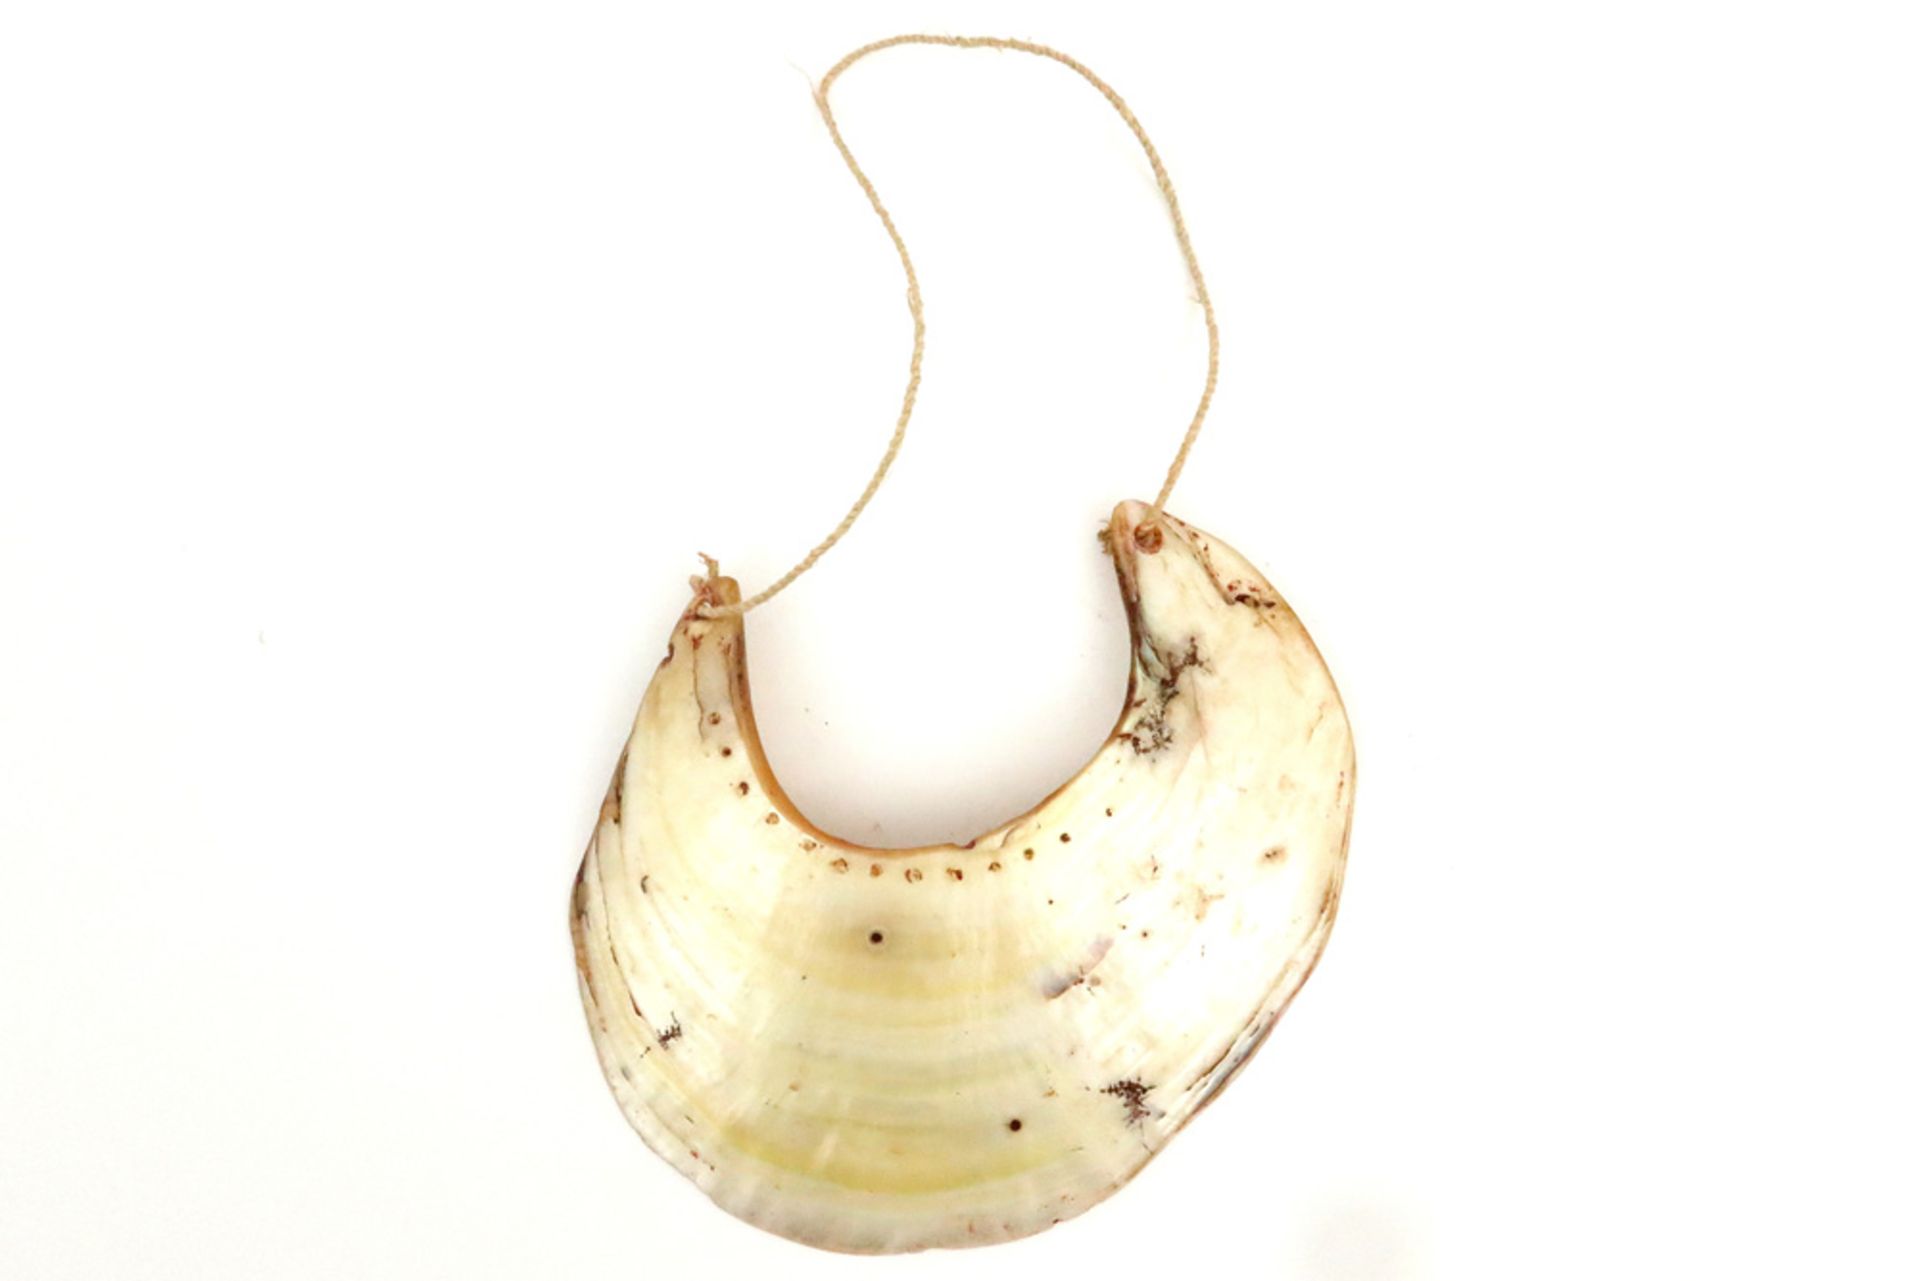 Papua New Guinean Southern Highlands "Kina" breastpiece of necklace with a shell - was worn by men